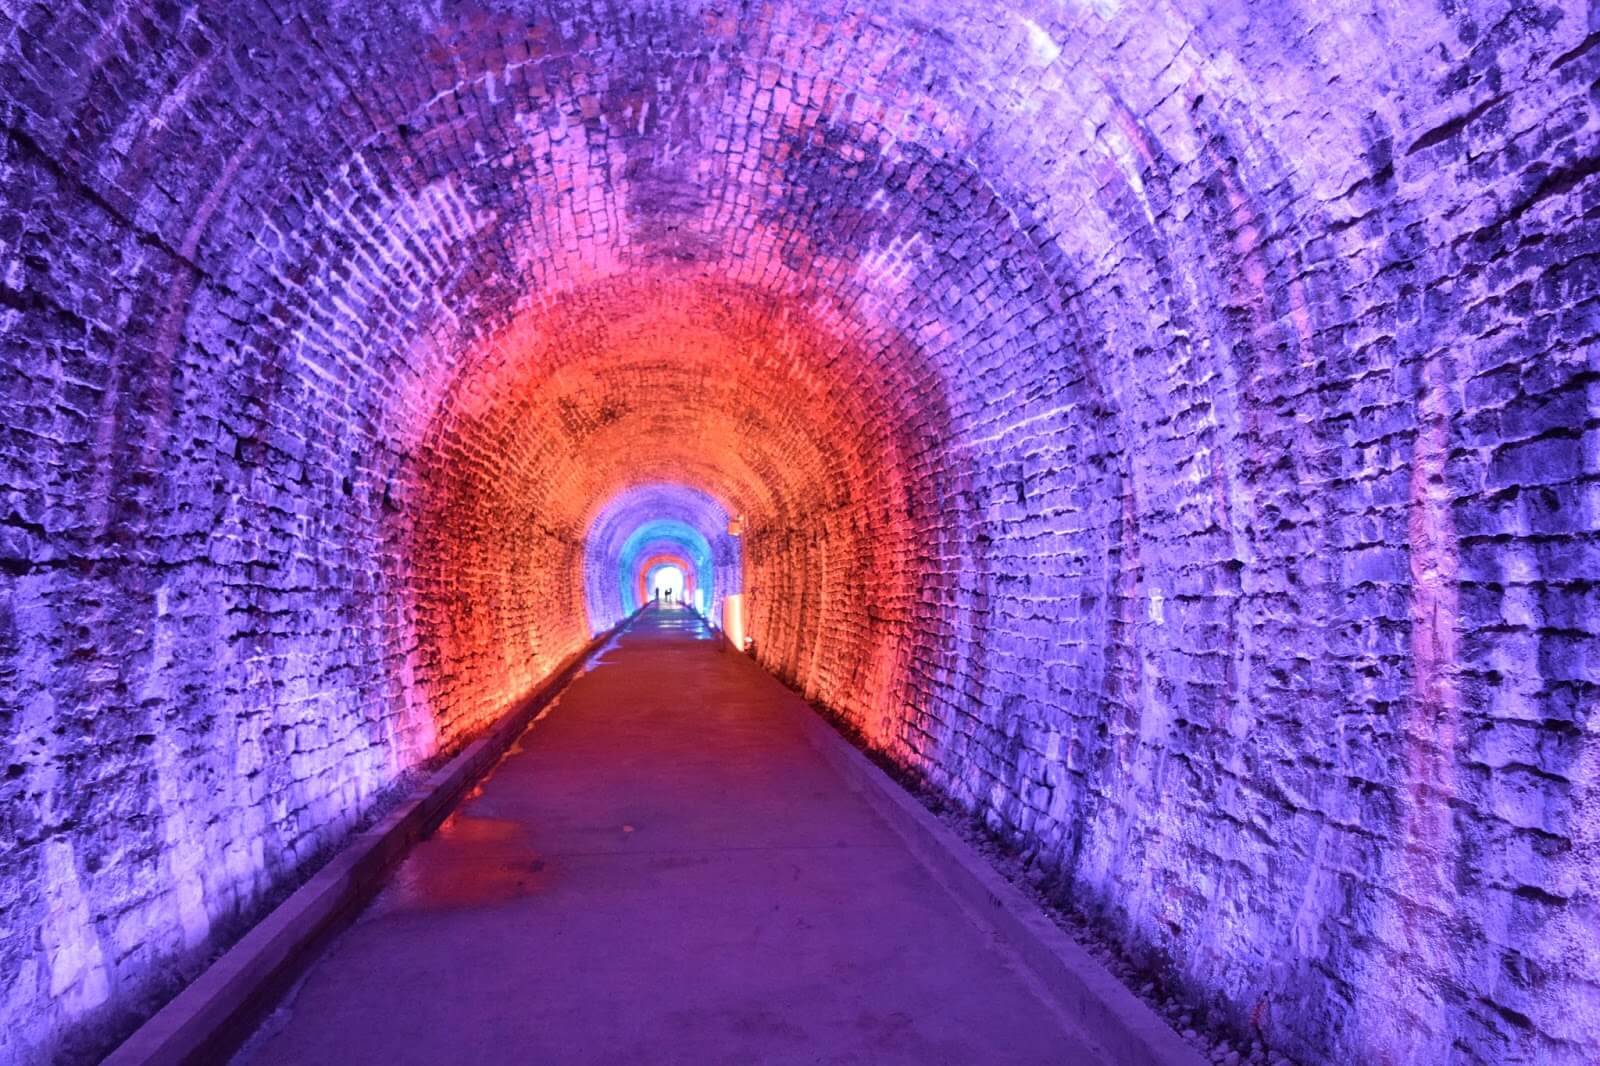 A photograph of an old railway tunnel used as a public art project with red and blue lights highlighting the interior of the tunnel